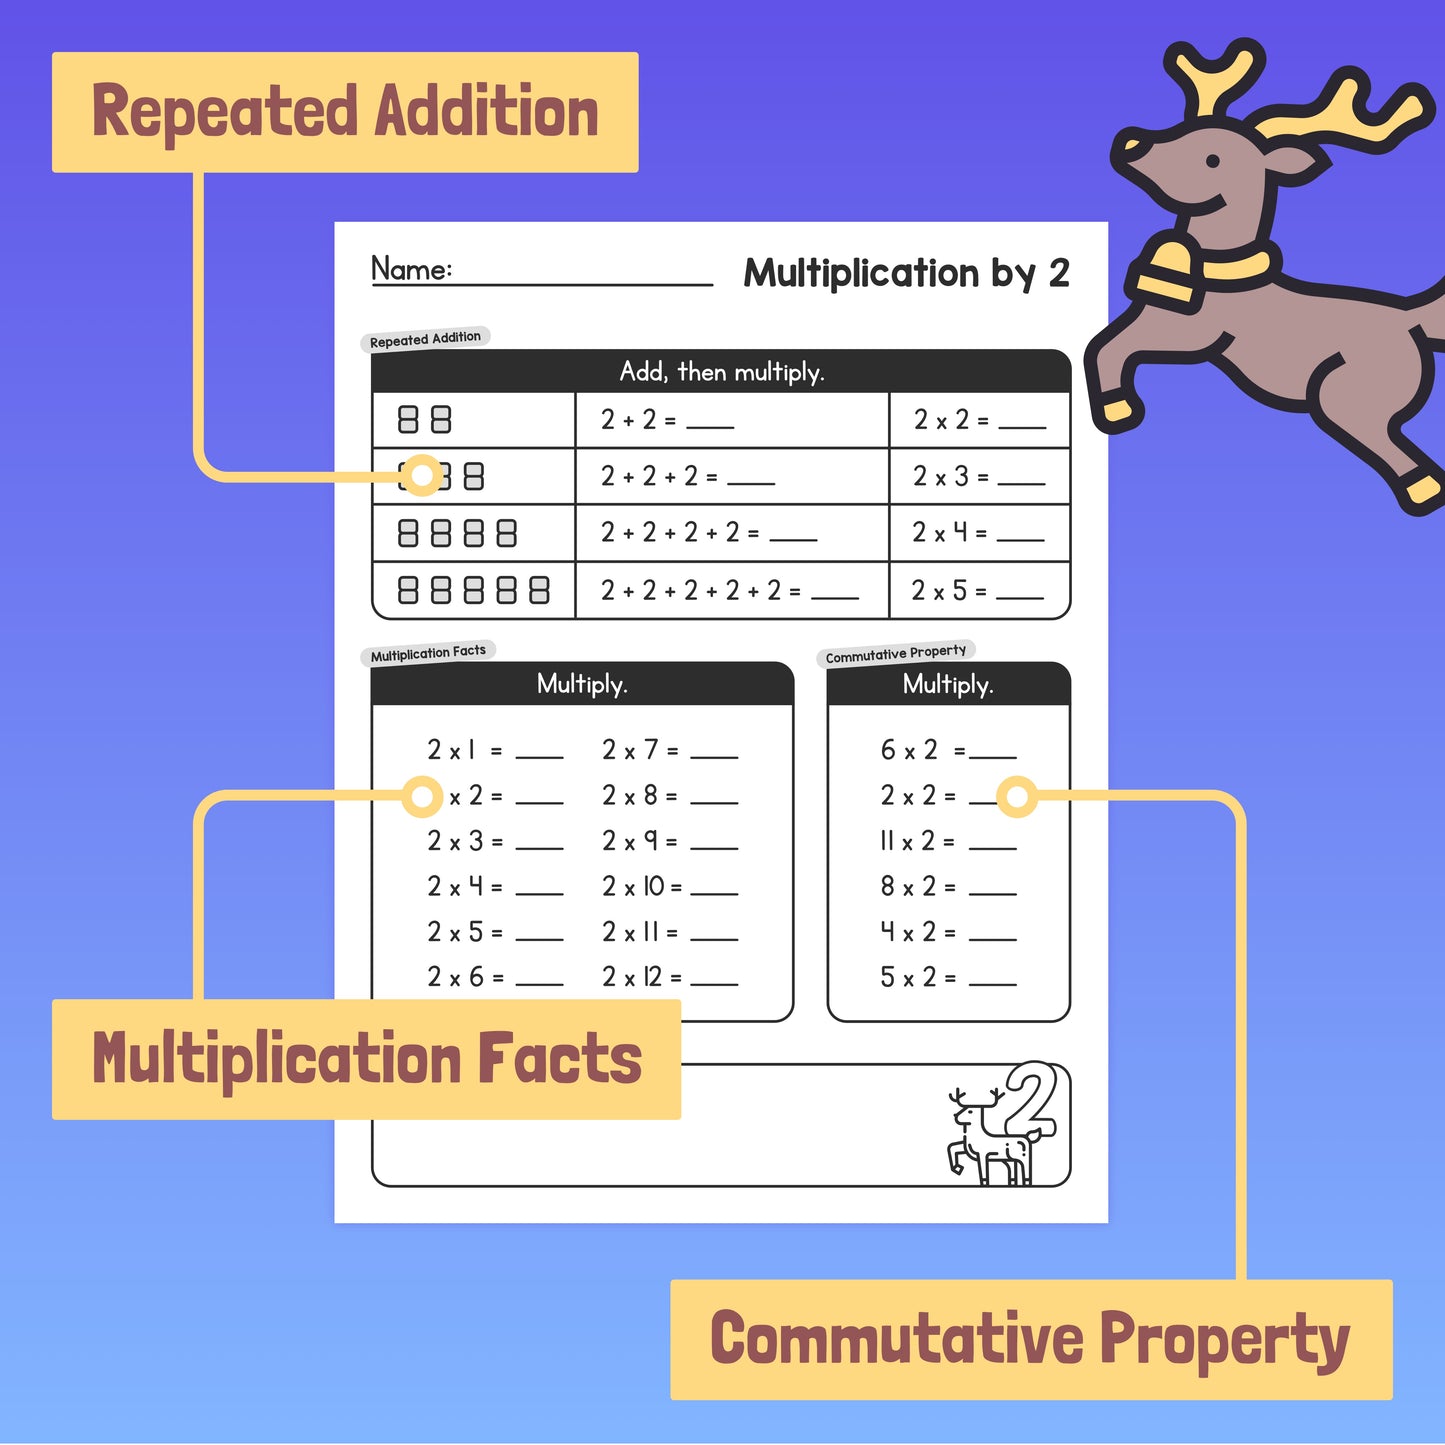 Winter Multiplication Facts Worksheets